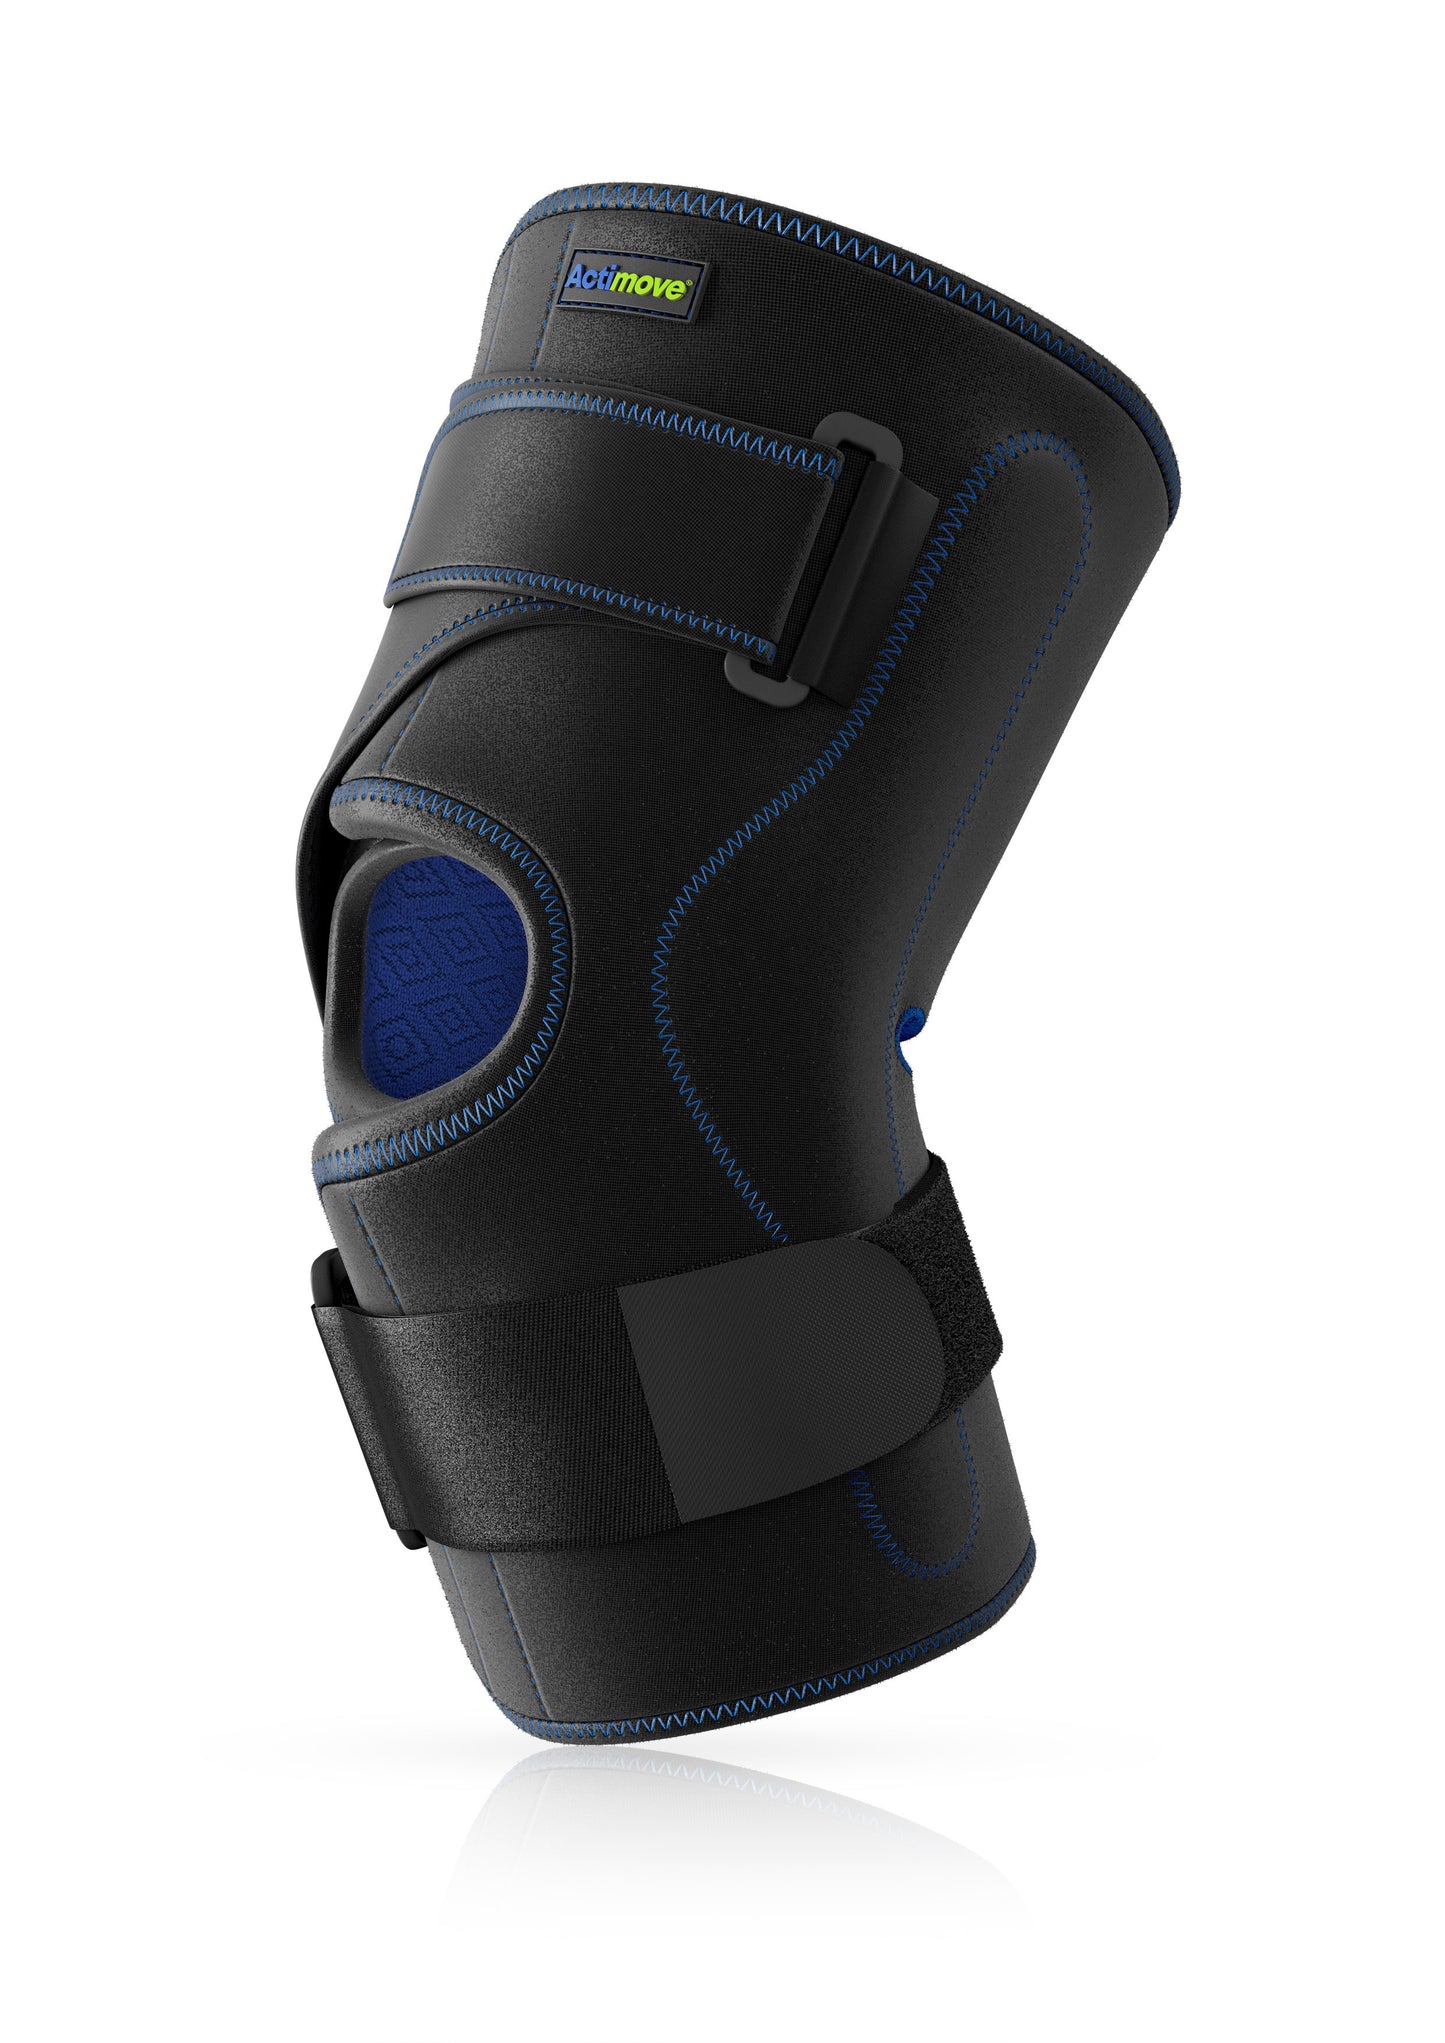 Actimove® Knee Brace - Wrap Around, Polycentric Hinges, Condyle Pads